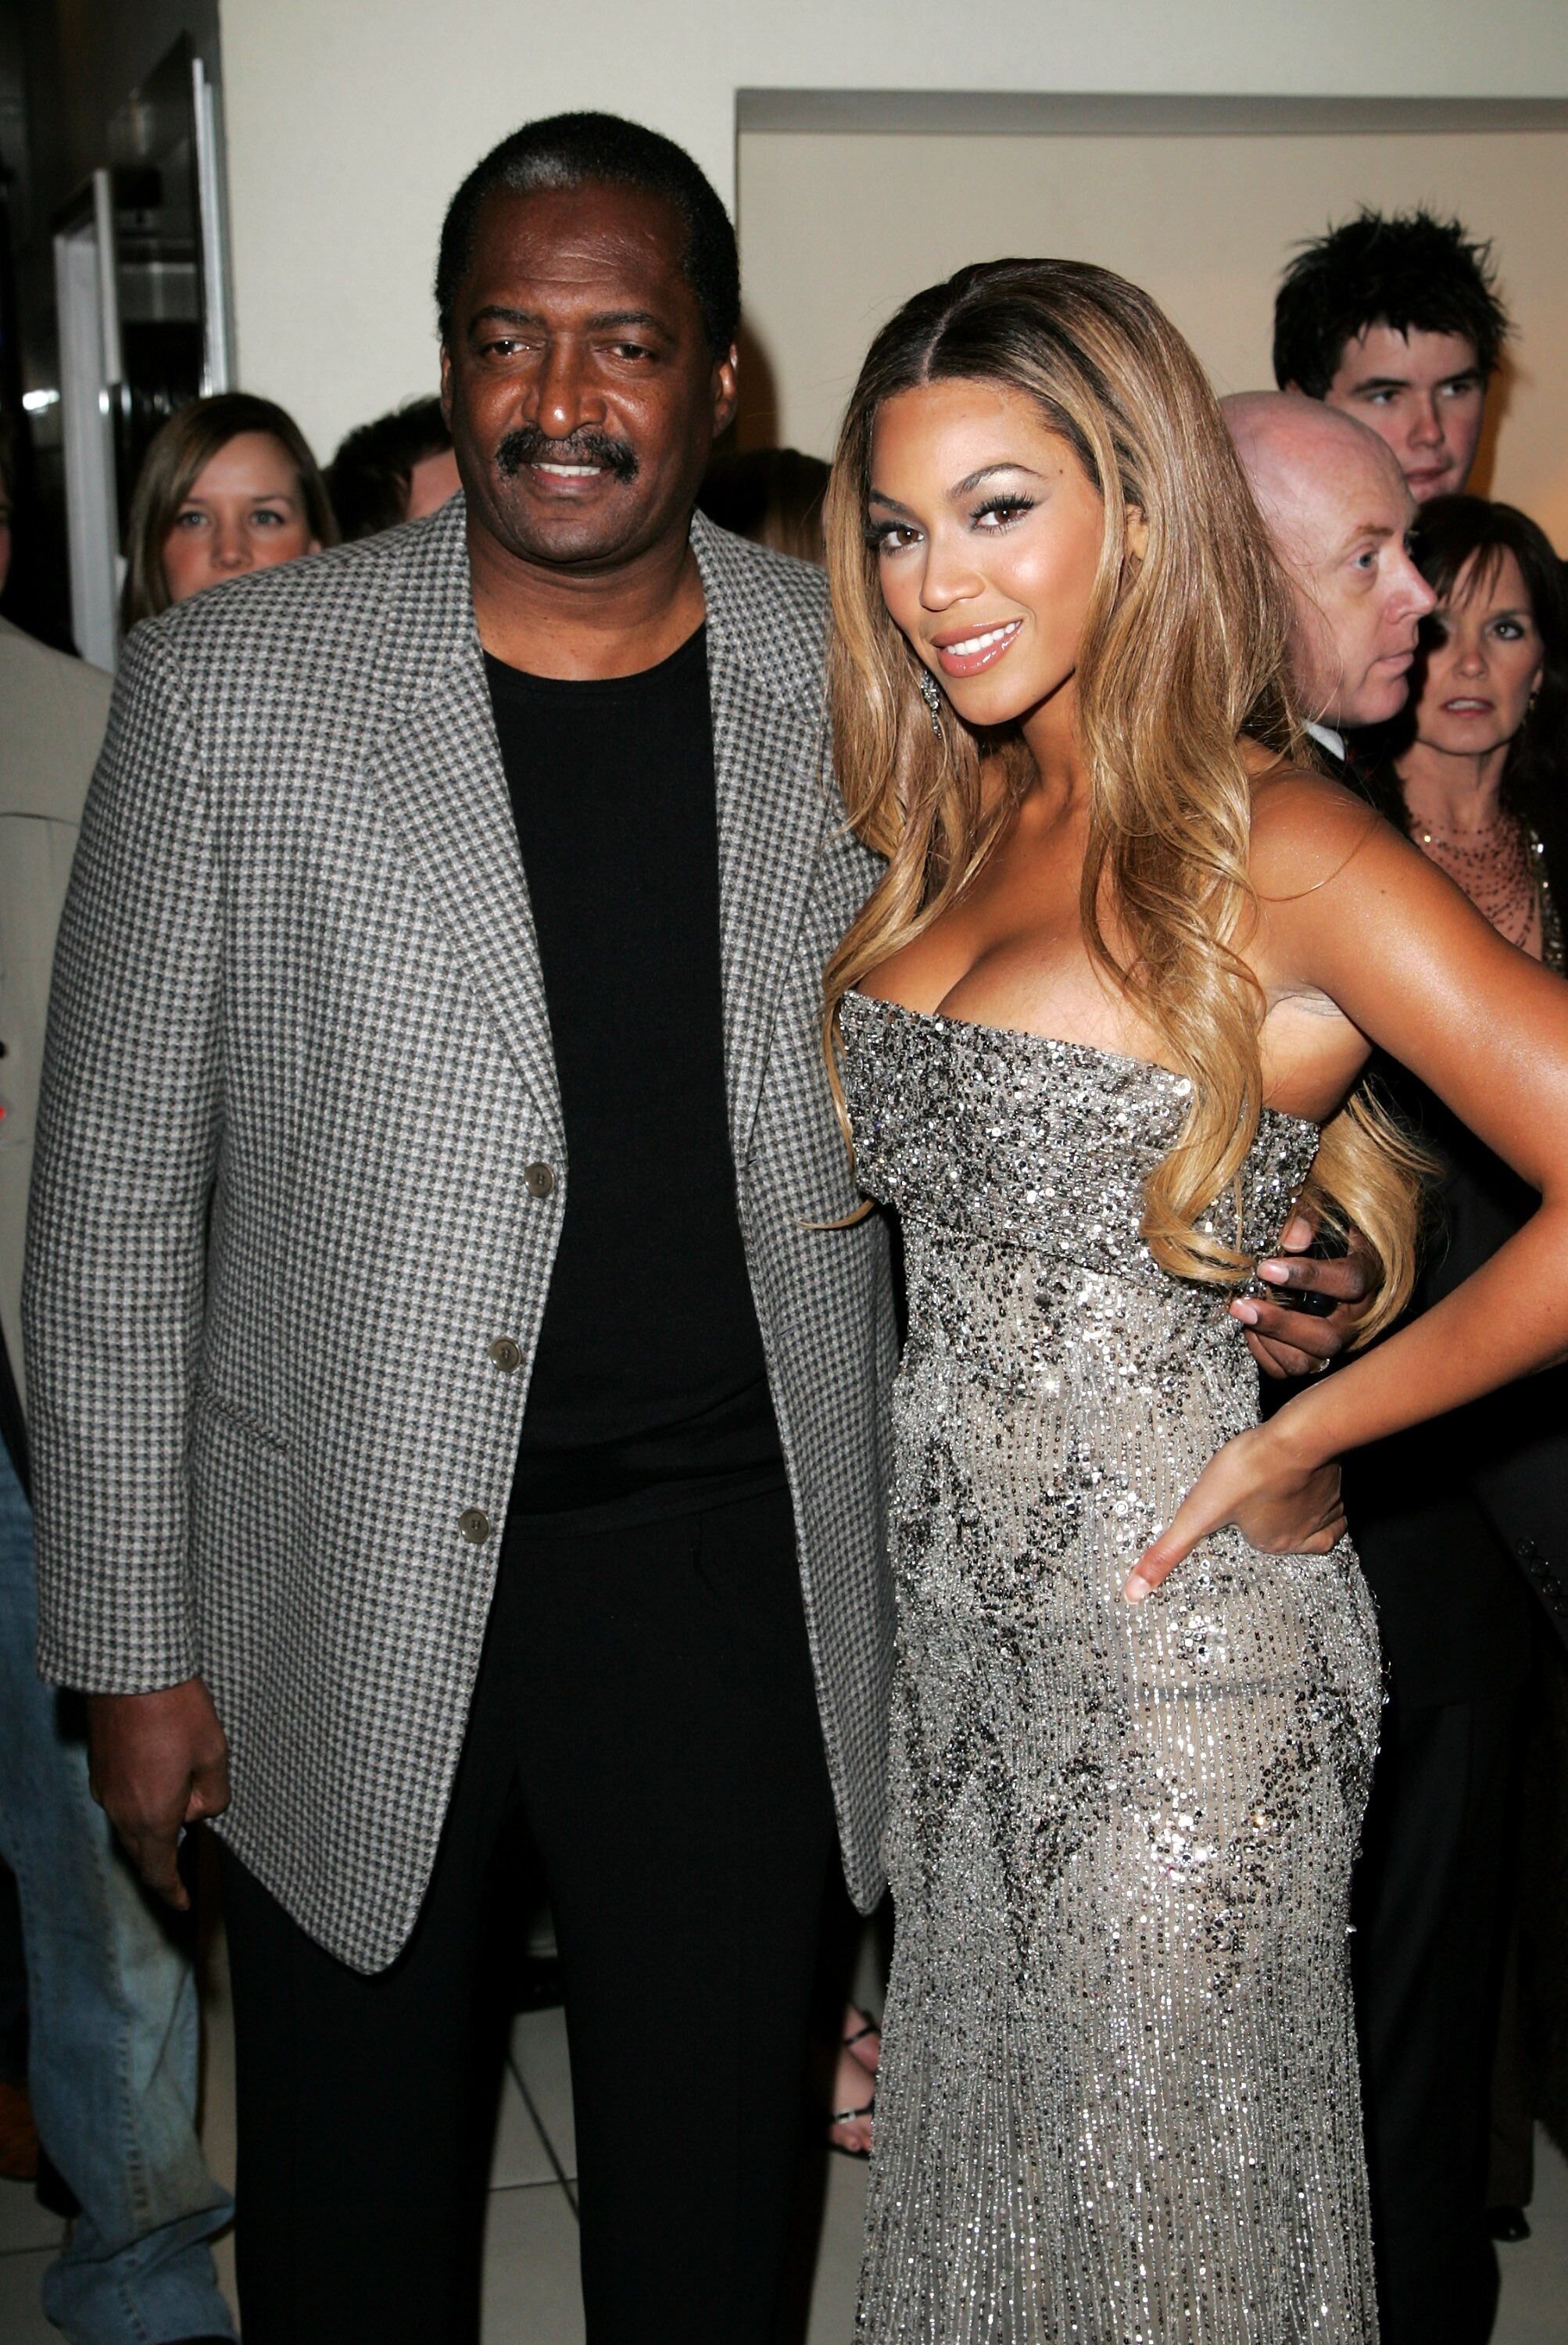 Mathew Knowles and his daughter Beyoncé/ Source: Getty Images